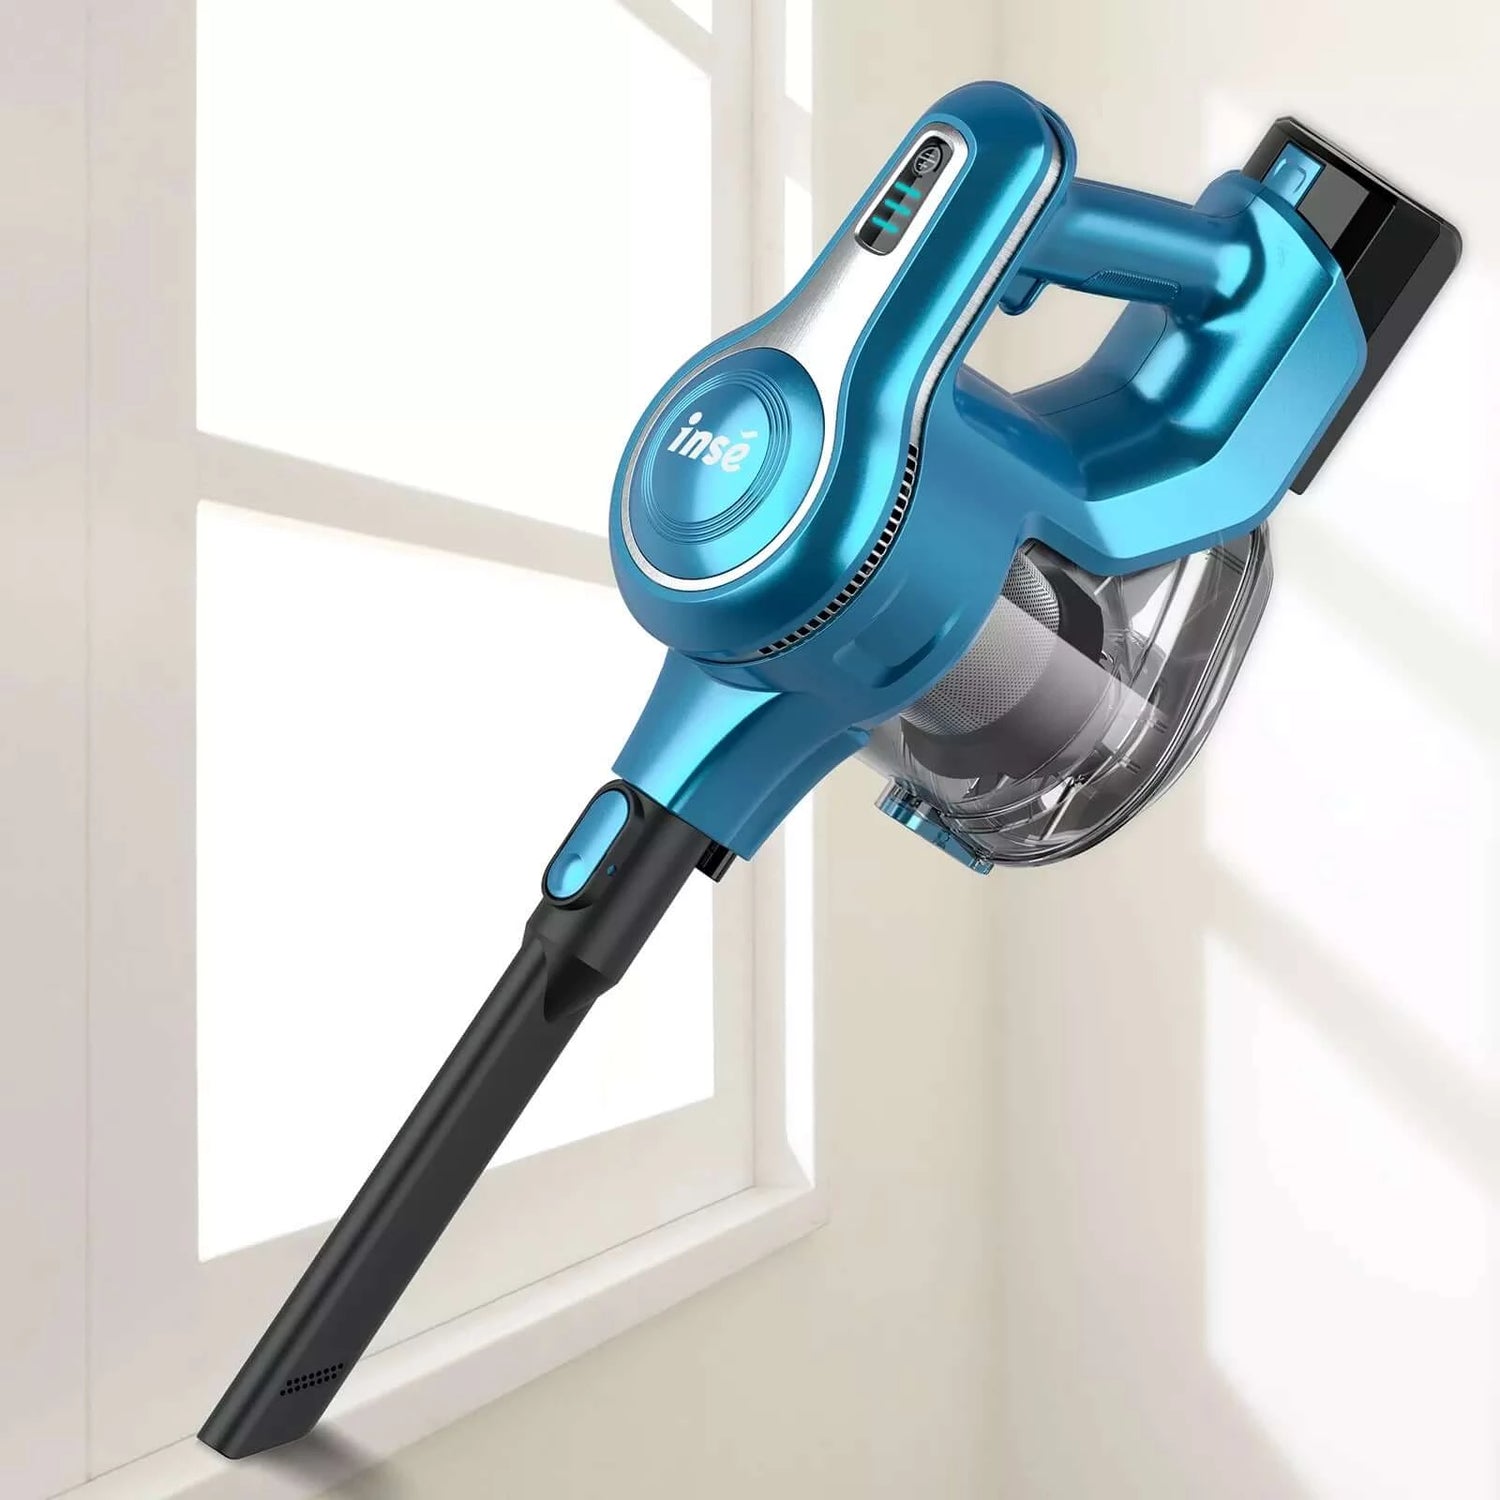 INSE S6P Pro Cordless Vacuum with 2 Batteries clean crevice with crevice tool-inselife.com